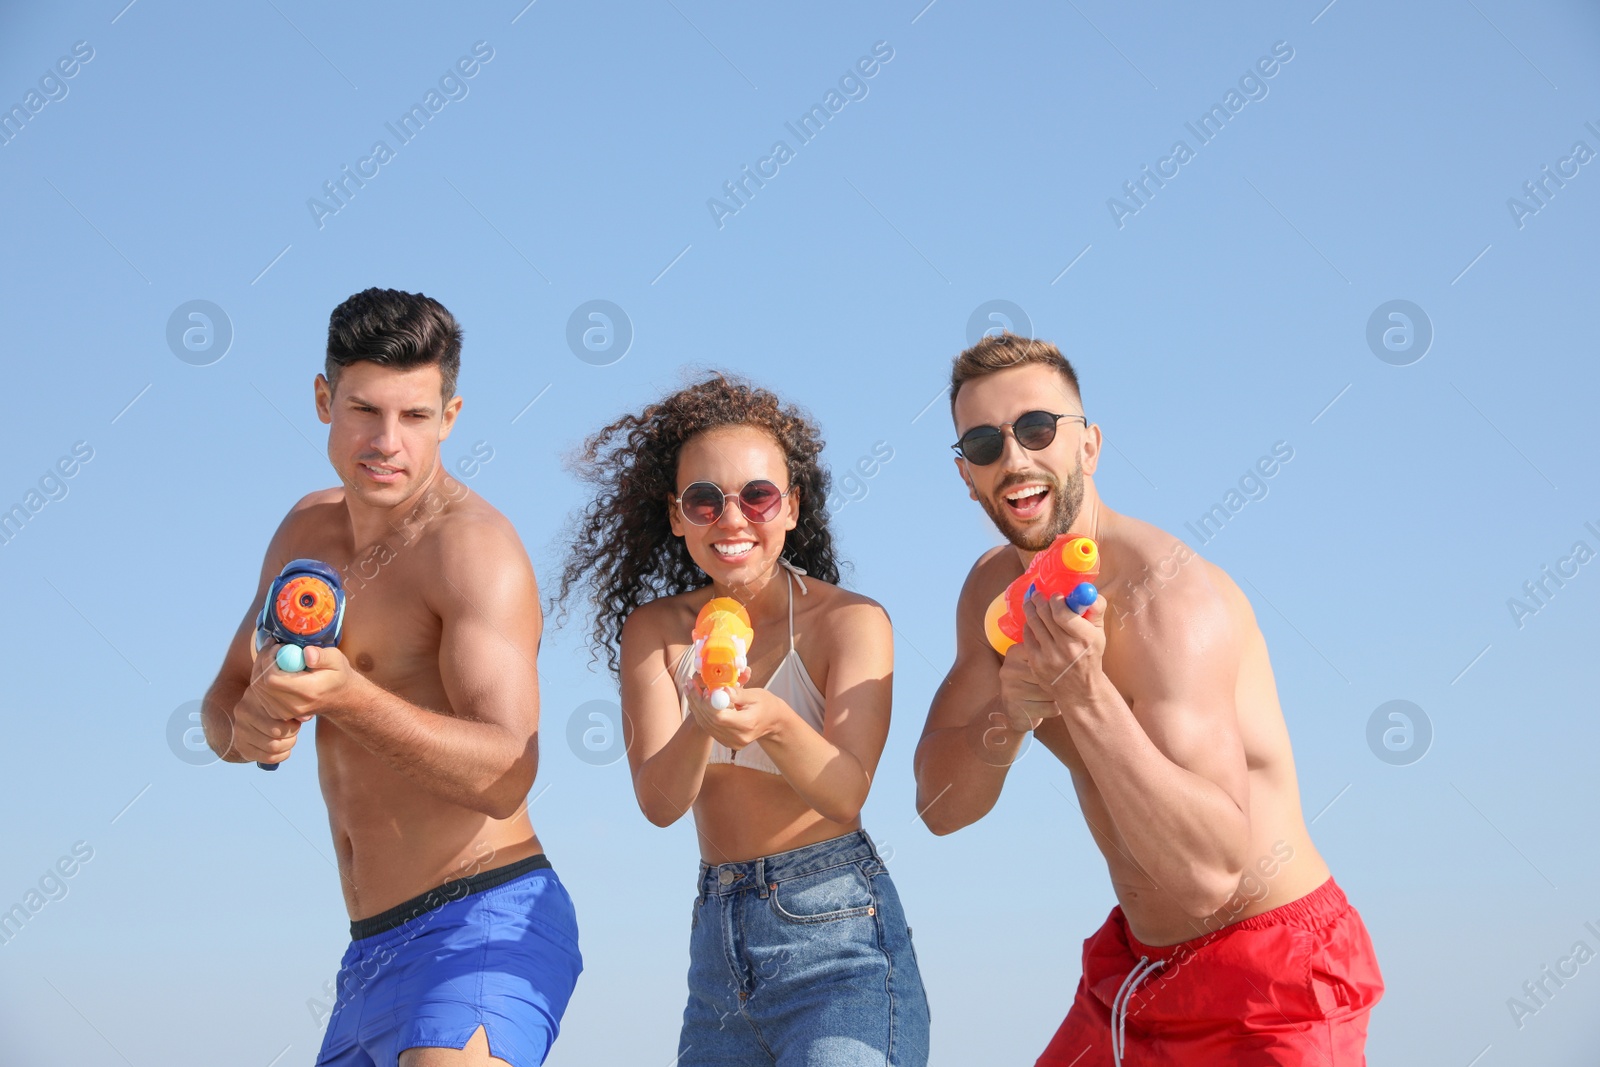 Photo of Friends with water guns having fun against blue sky